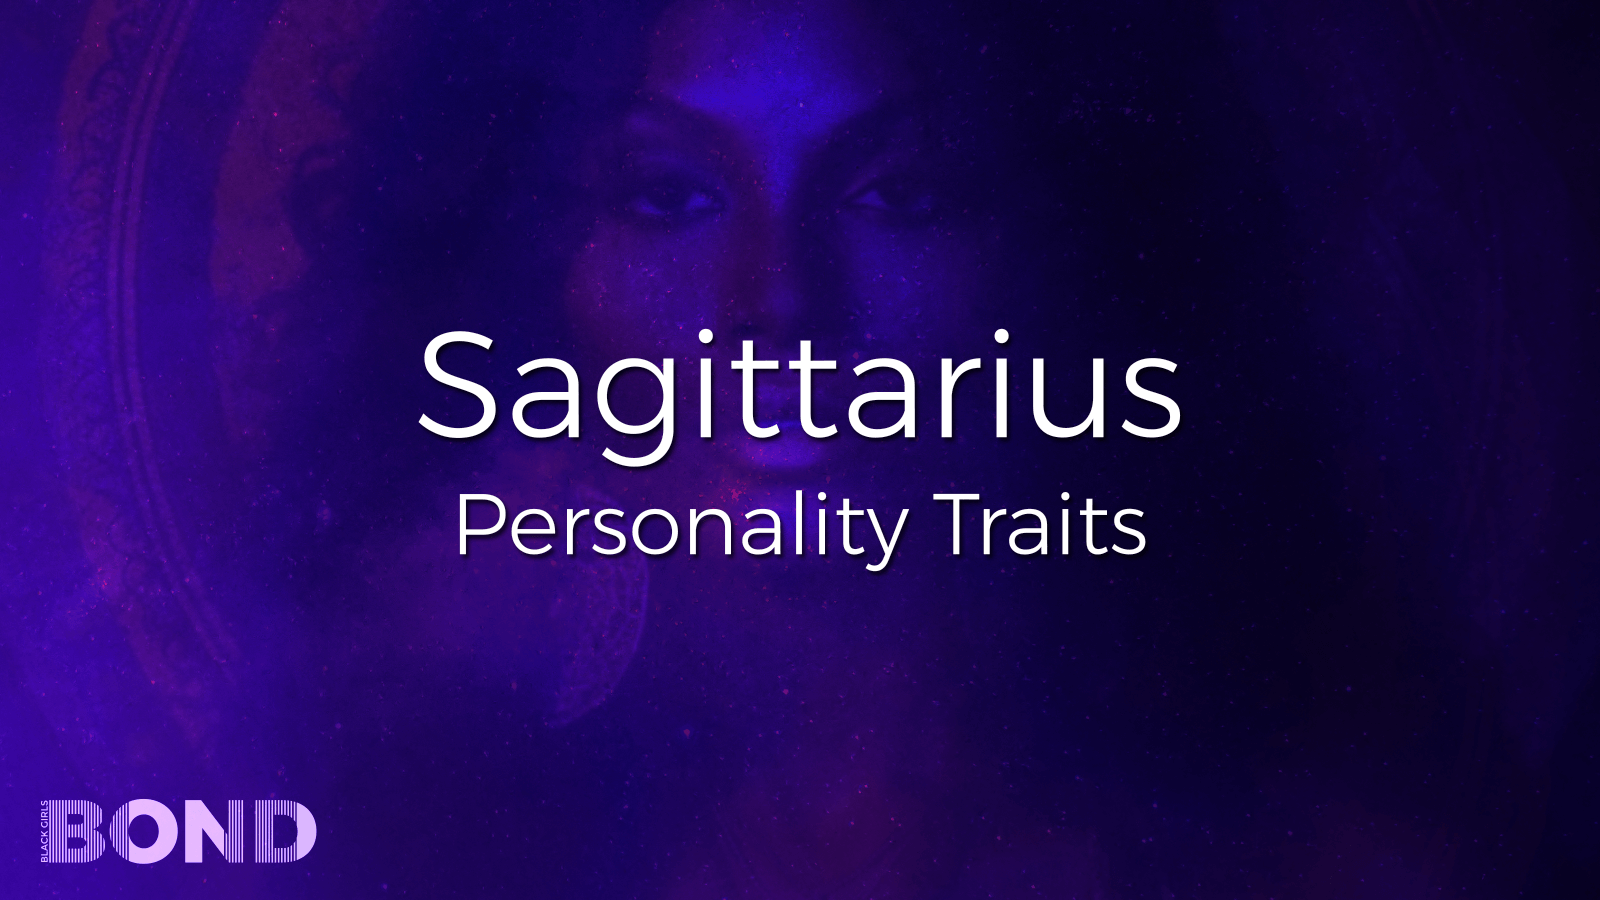 Sagittarius Zodiac Sign: Personality Traits, Compatibility, Love, Relationships and More